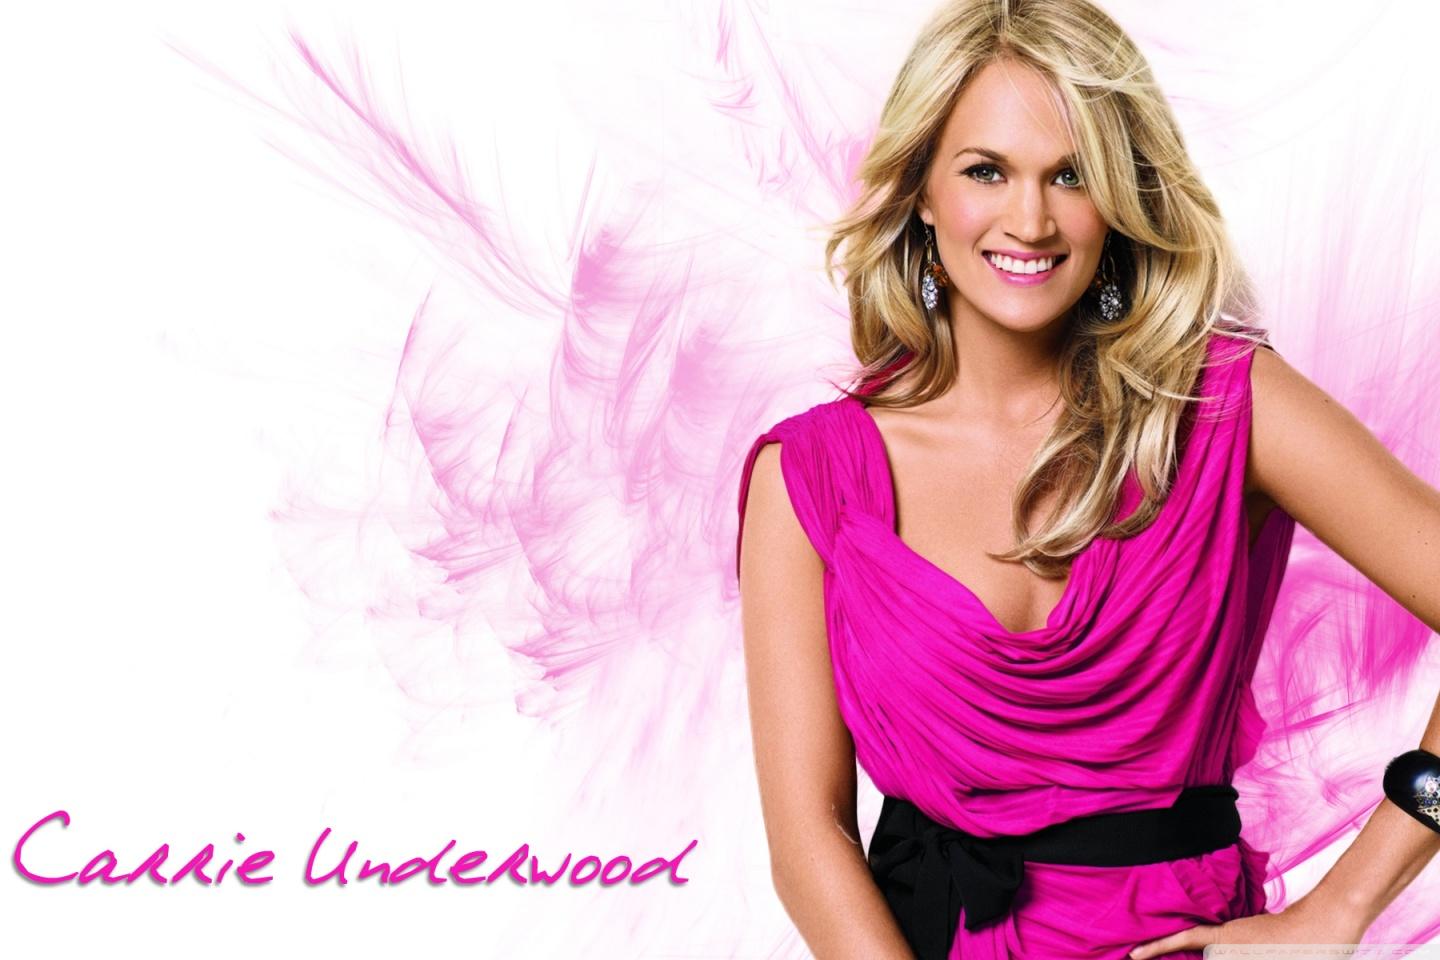 Wallpaper Blink of Carrie Underwood Wallpaper HD for Android